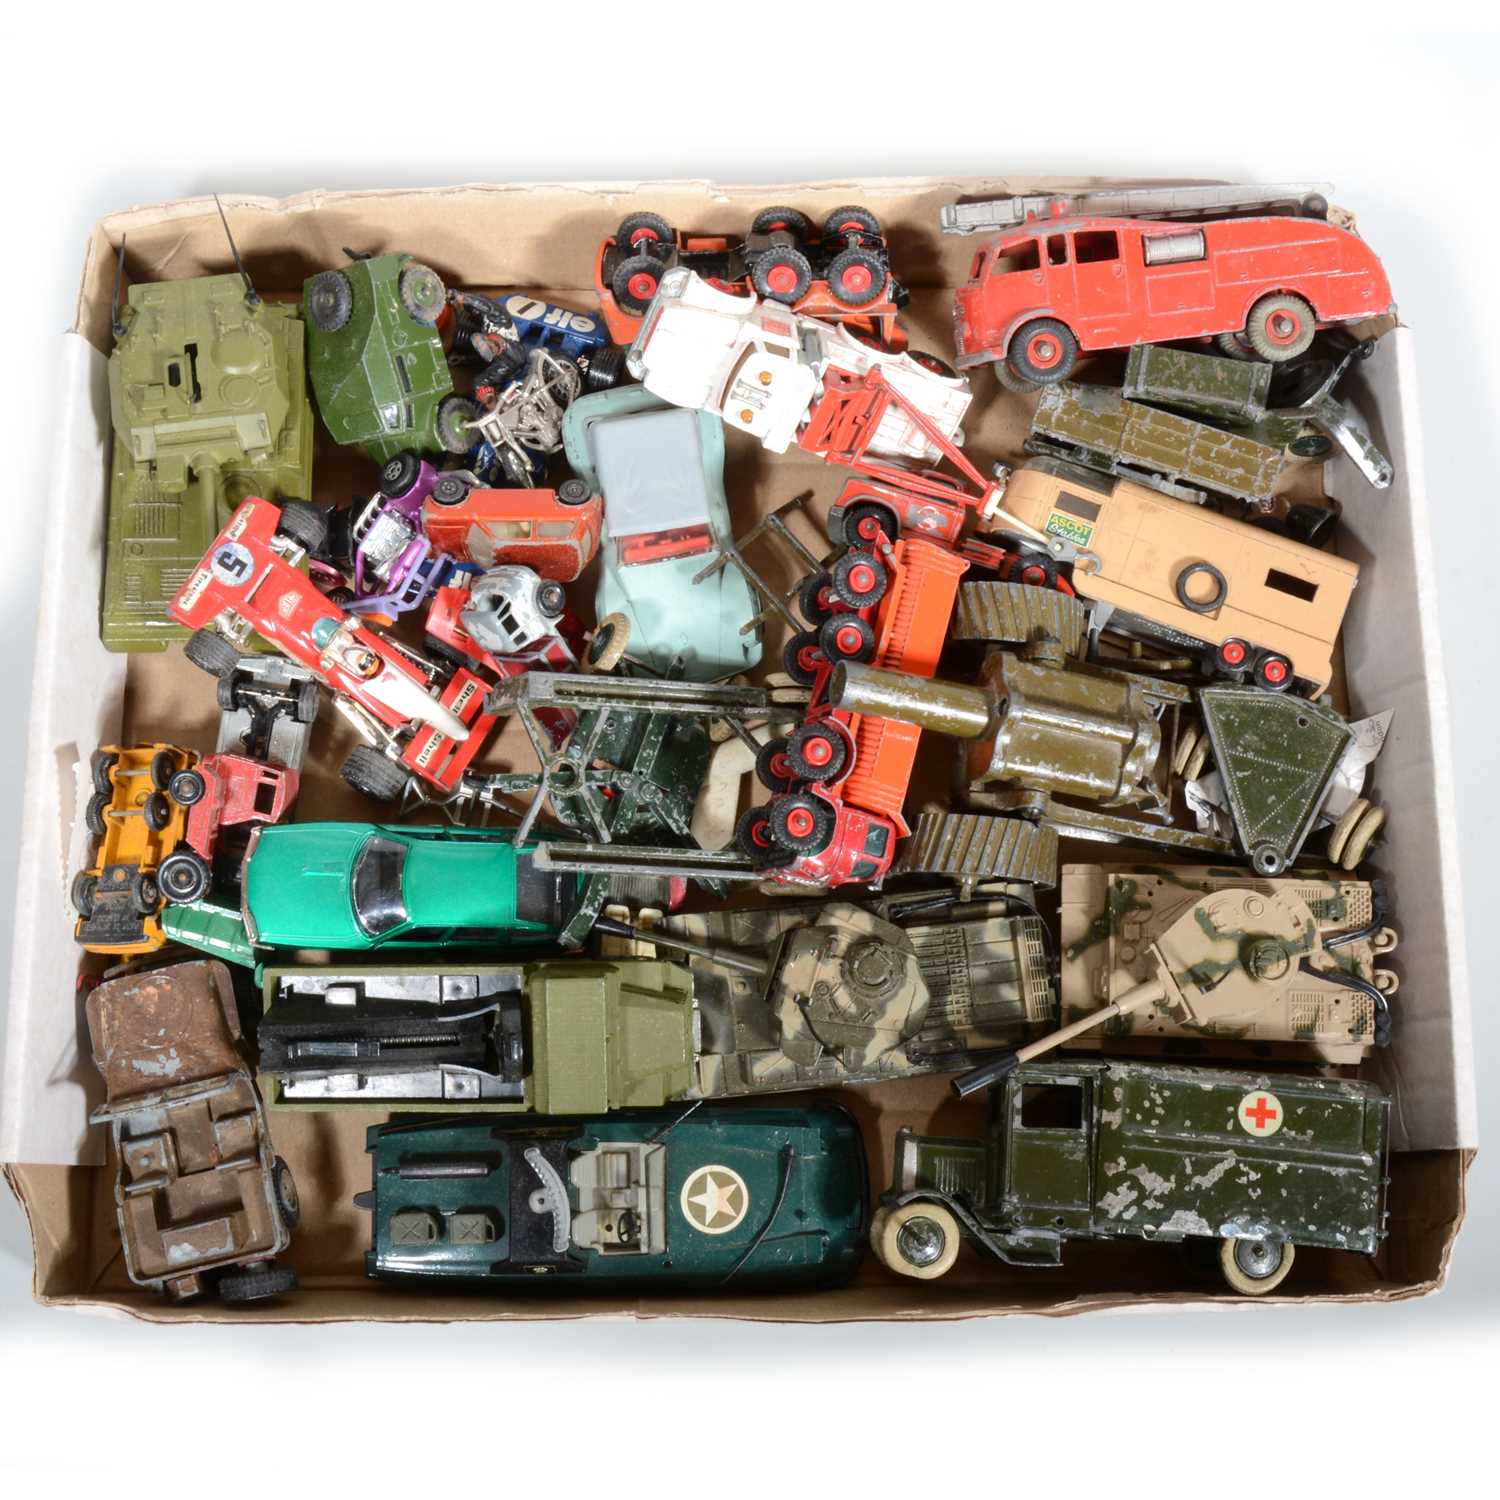 Lot 112 - Die-cast models, vehicles and cars, one tray including early Britains military ambulance